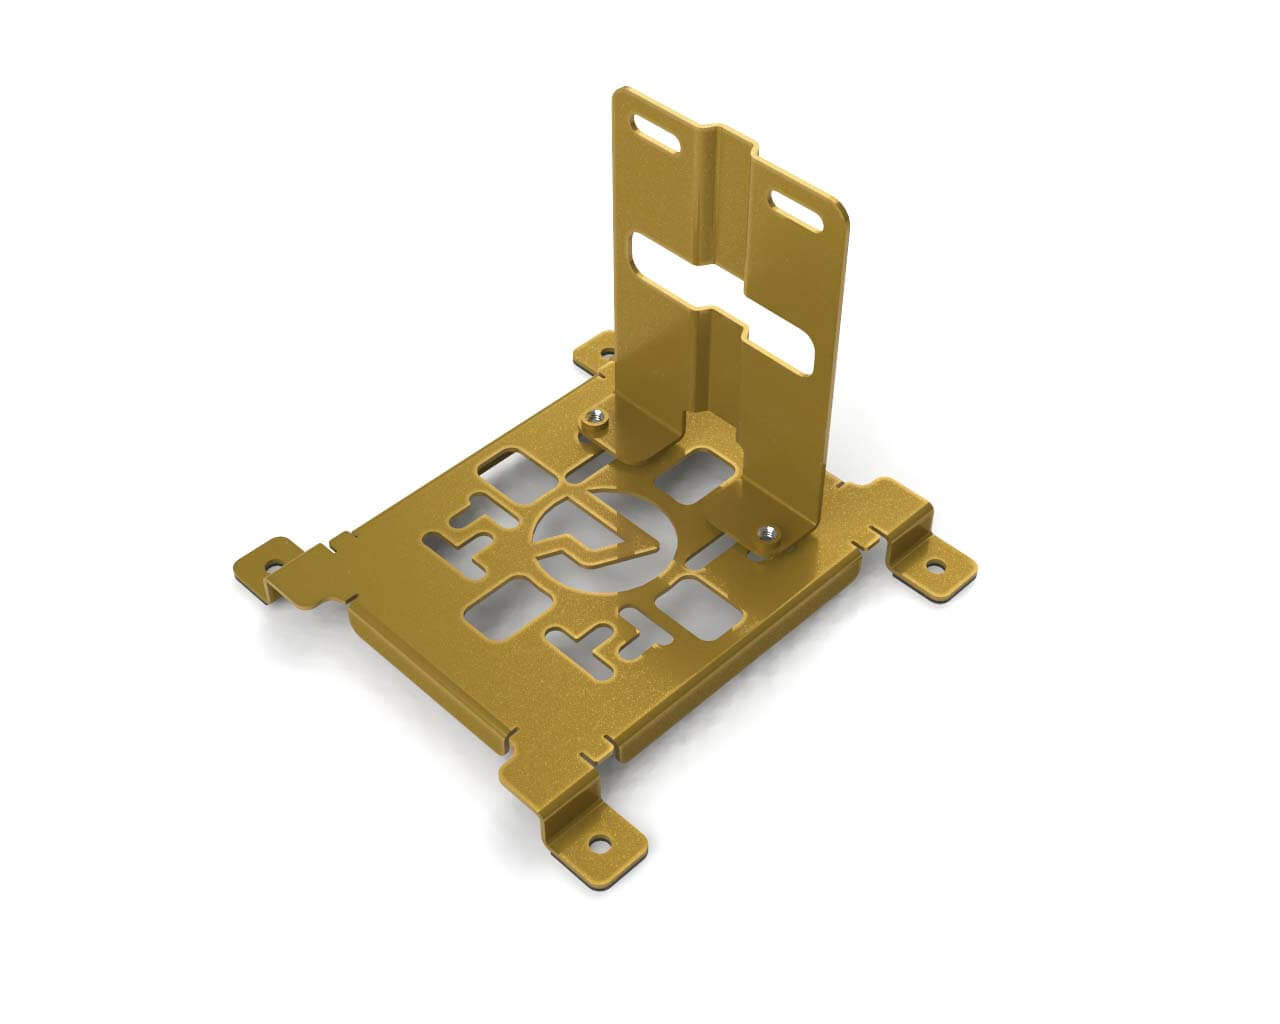 PrimoChill SX CTR2 Spider Mount Bracket Kit - 120mm Series - PrimoChill - KEEPING IT COOL Gold